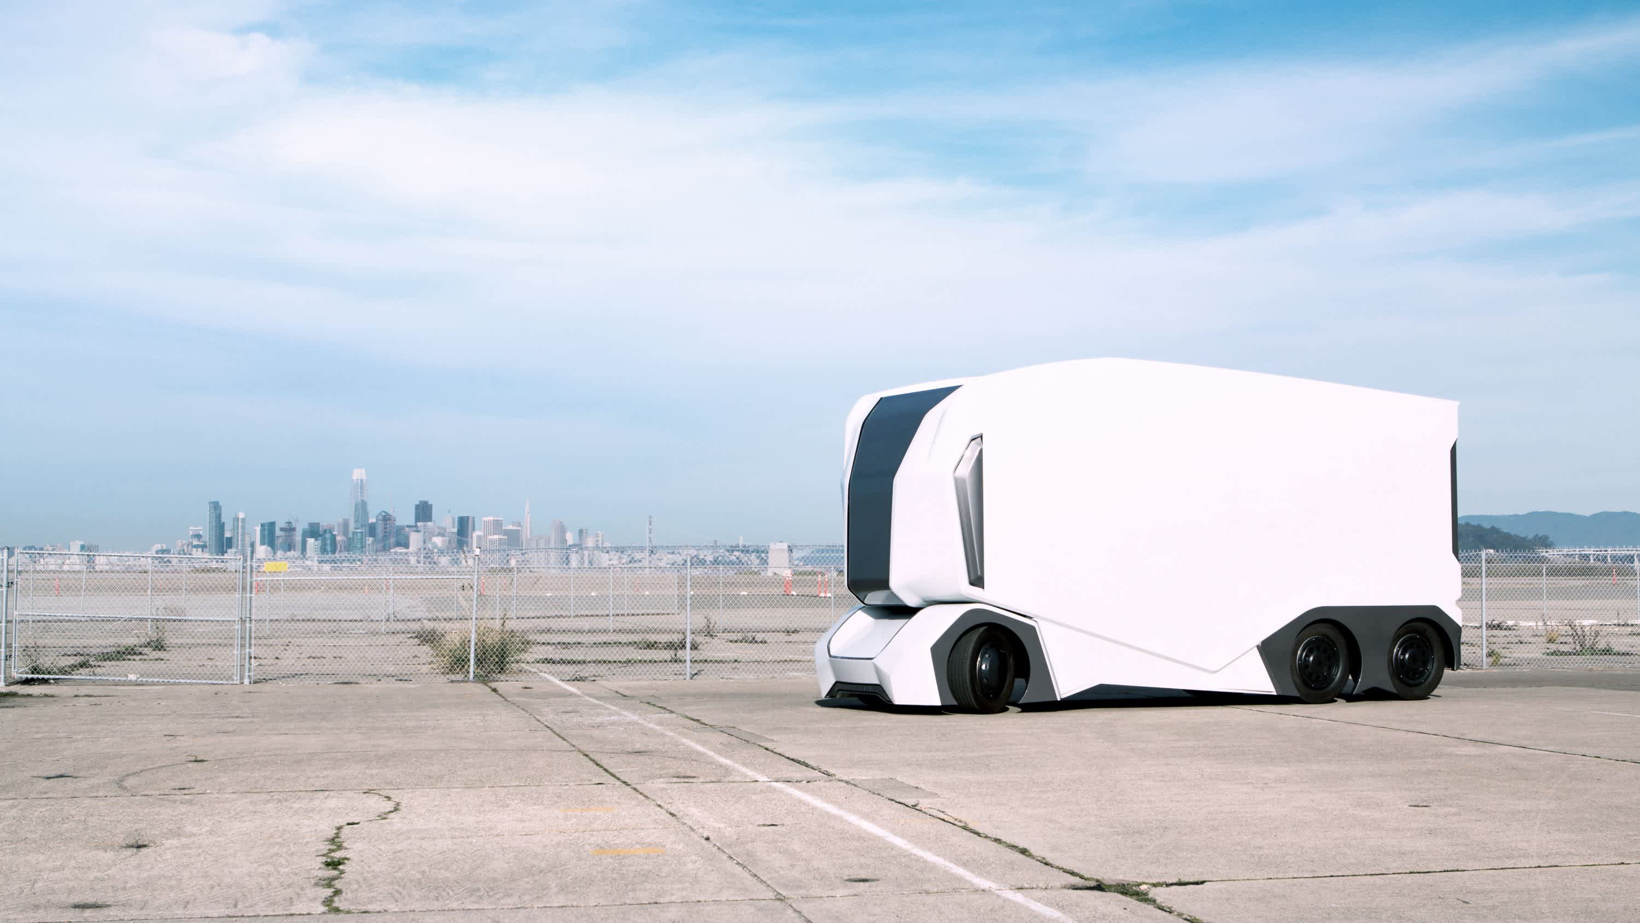 Einride gets approval to operate self-driving trucks on U.S. roads